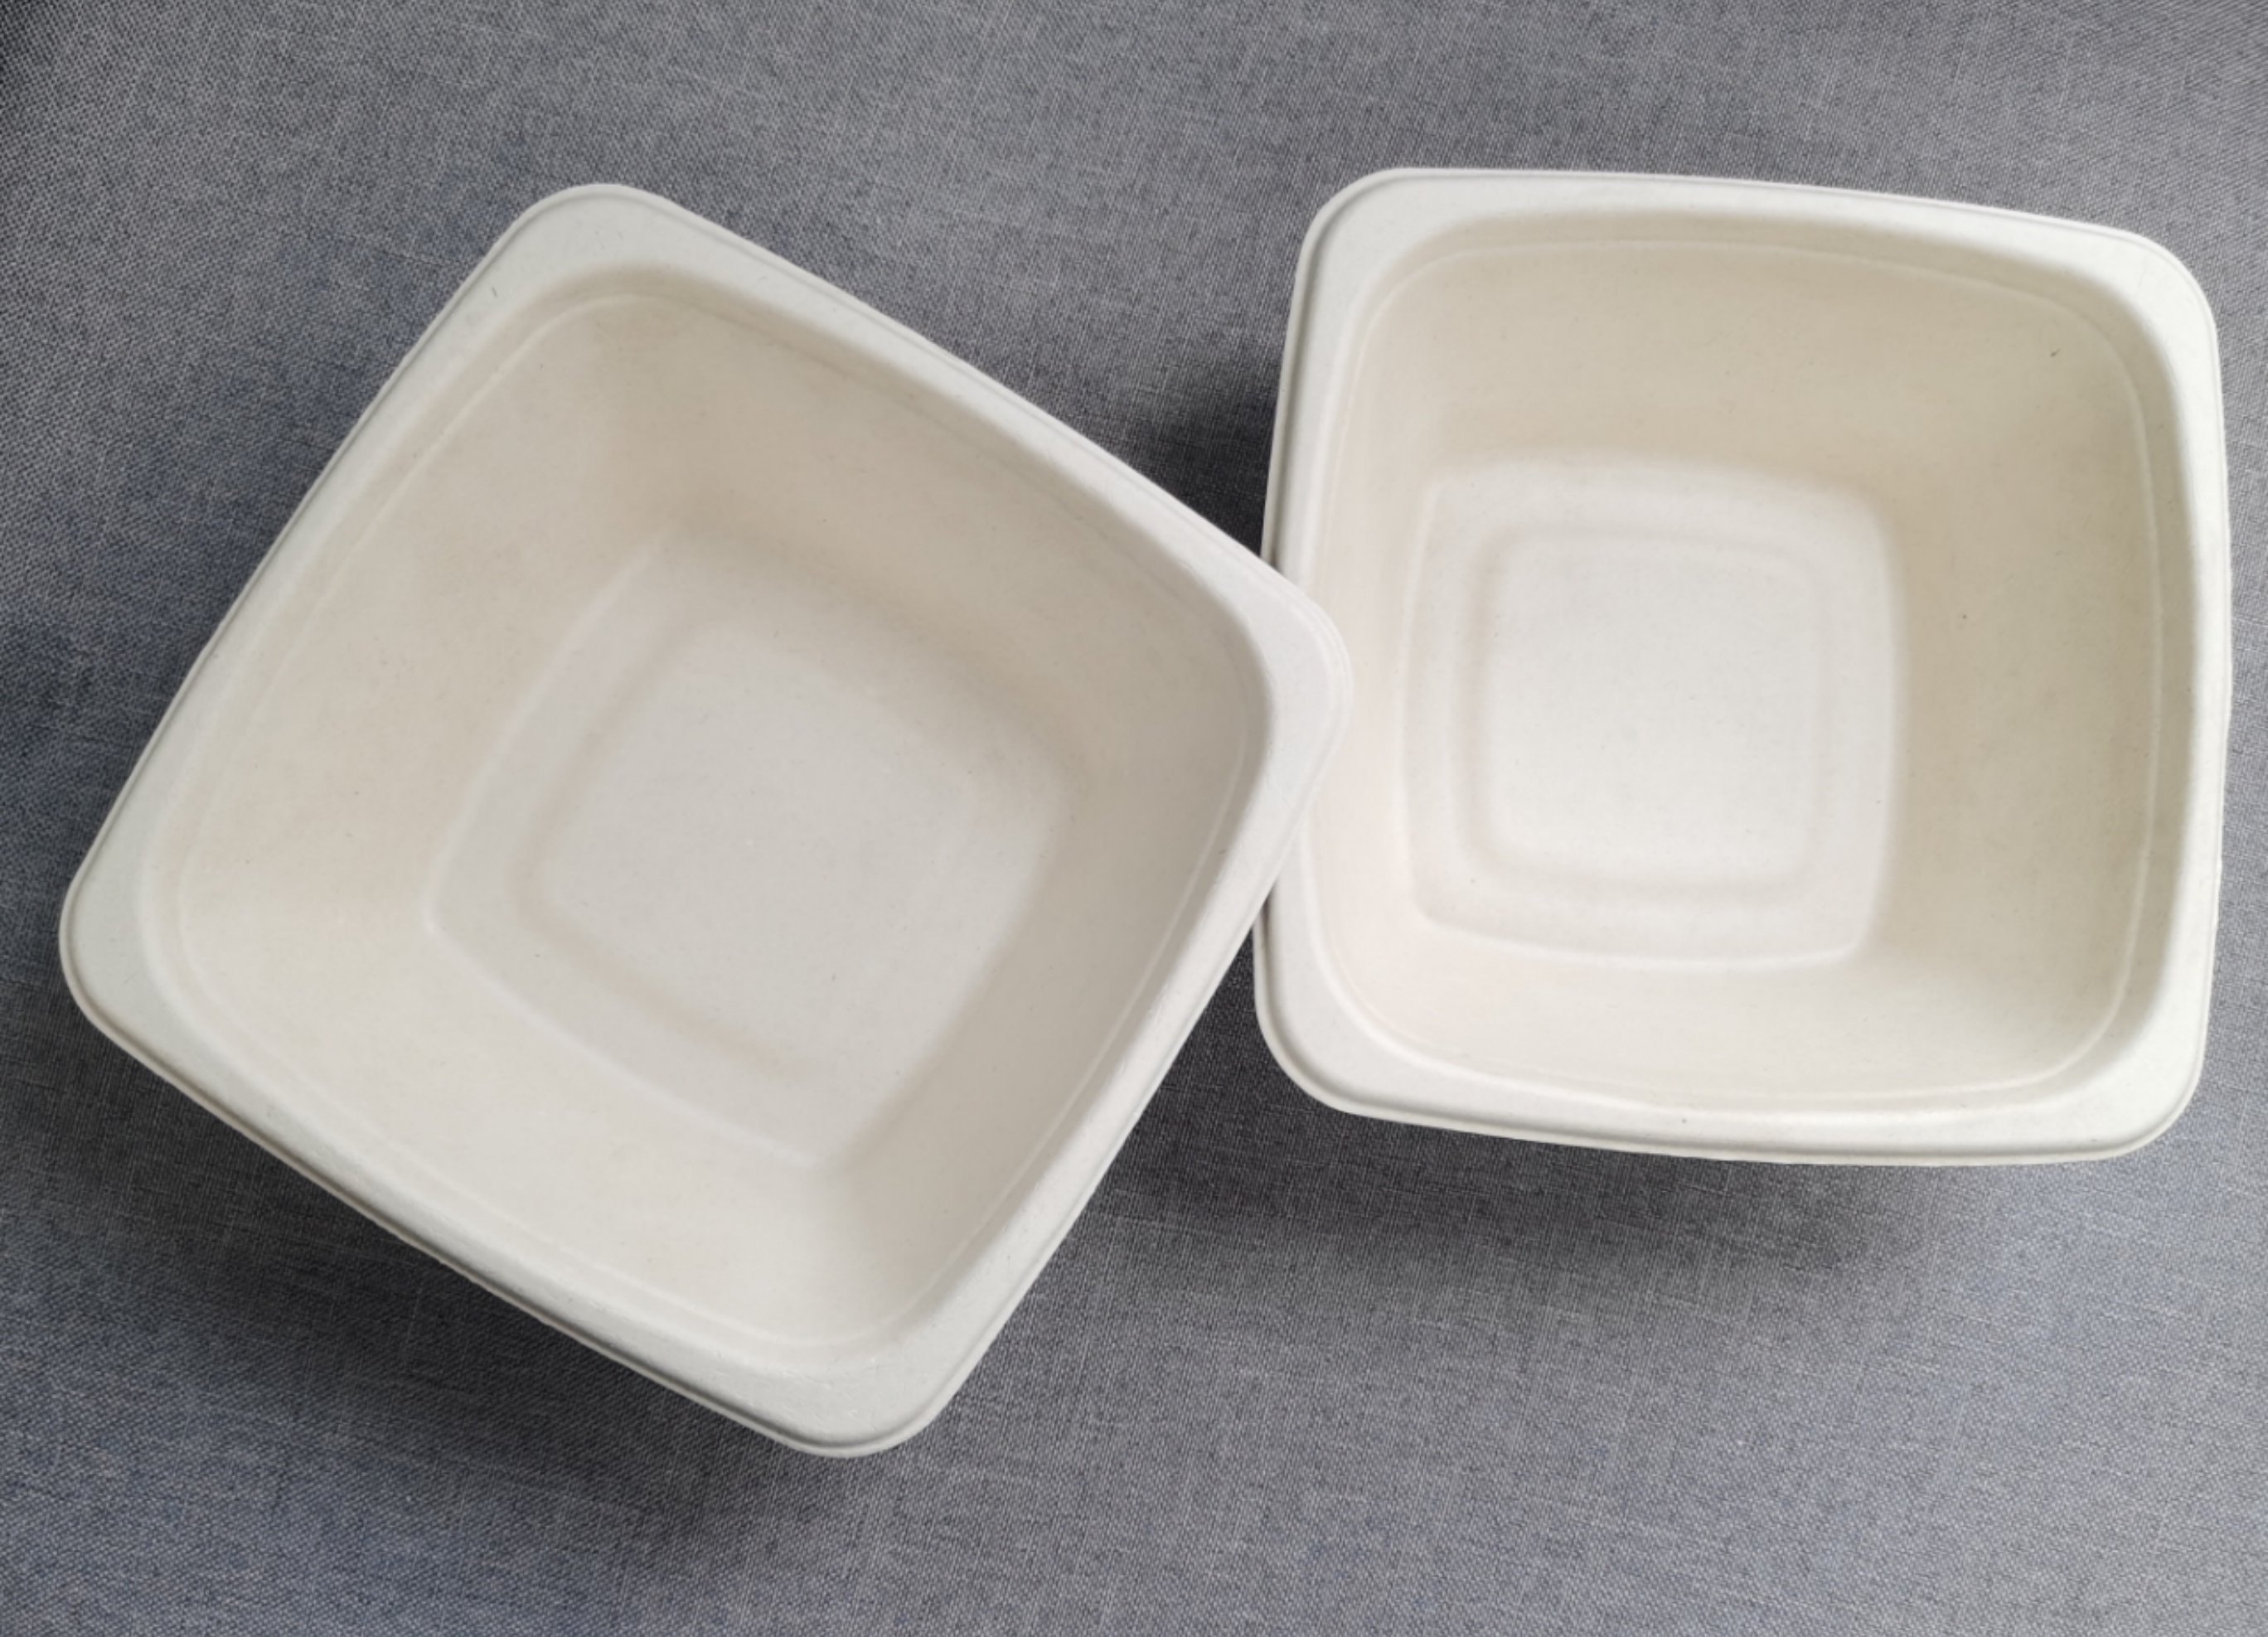 small paper bowls 4 oz compostable